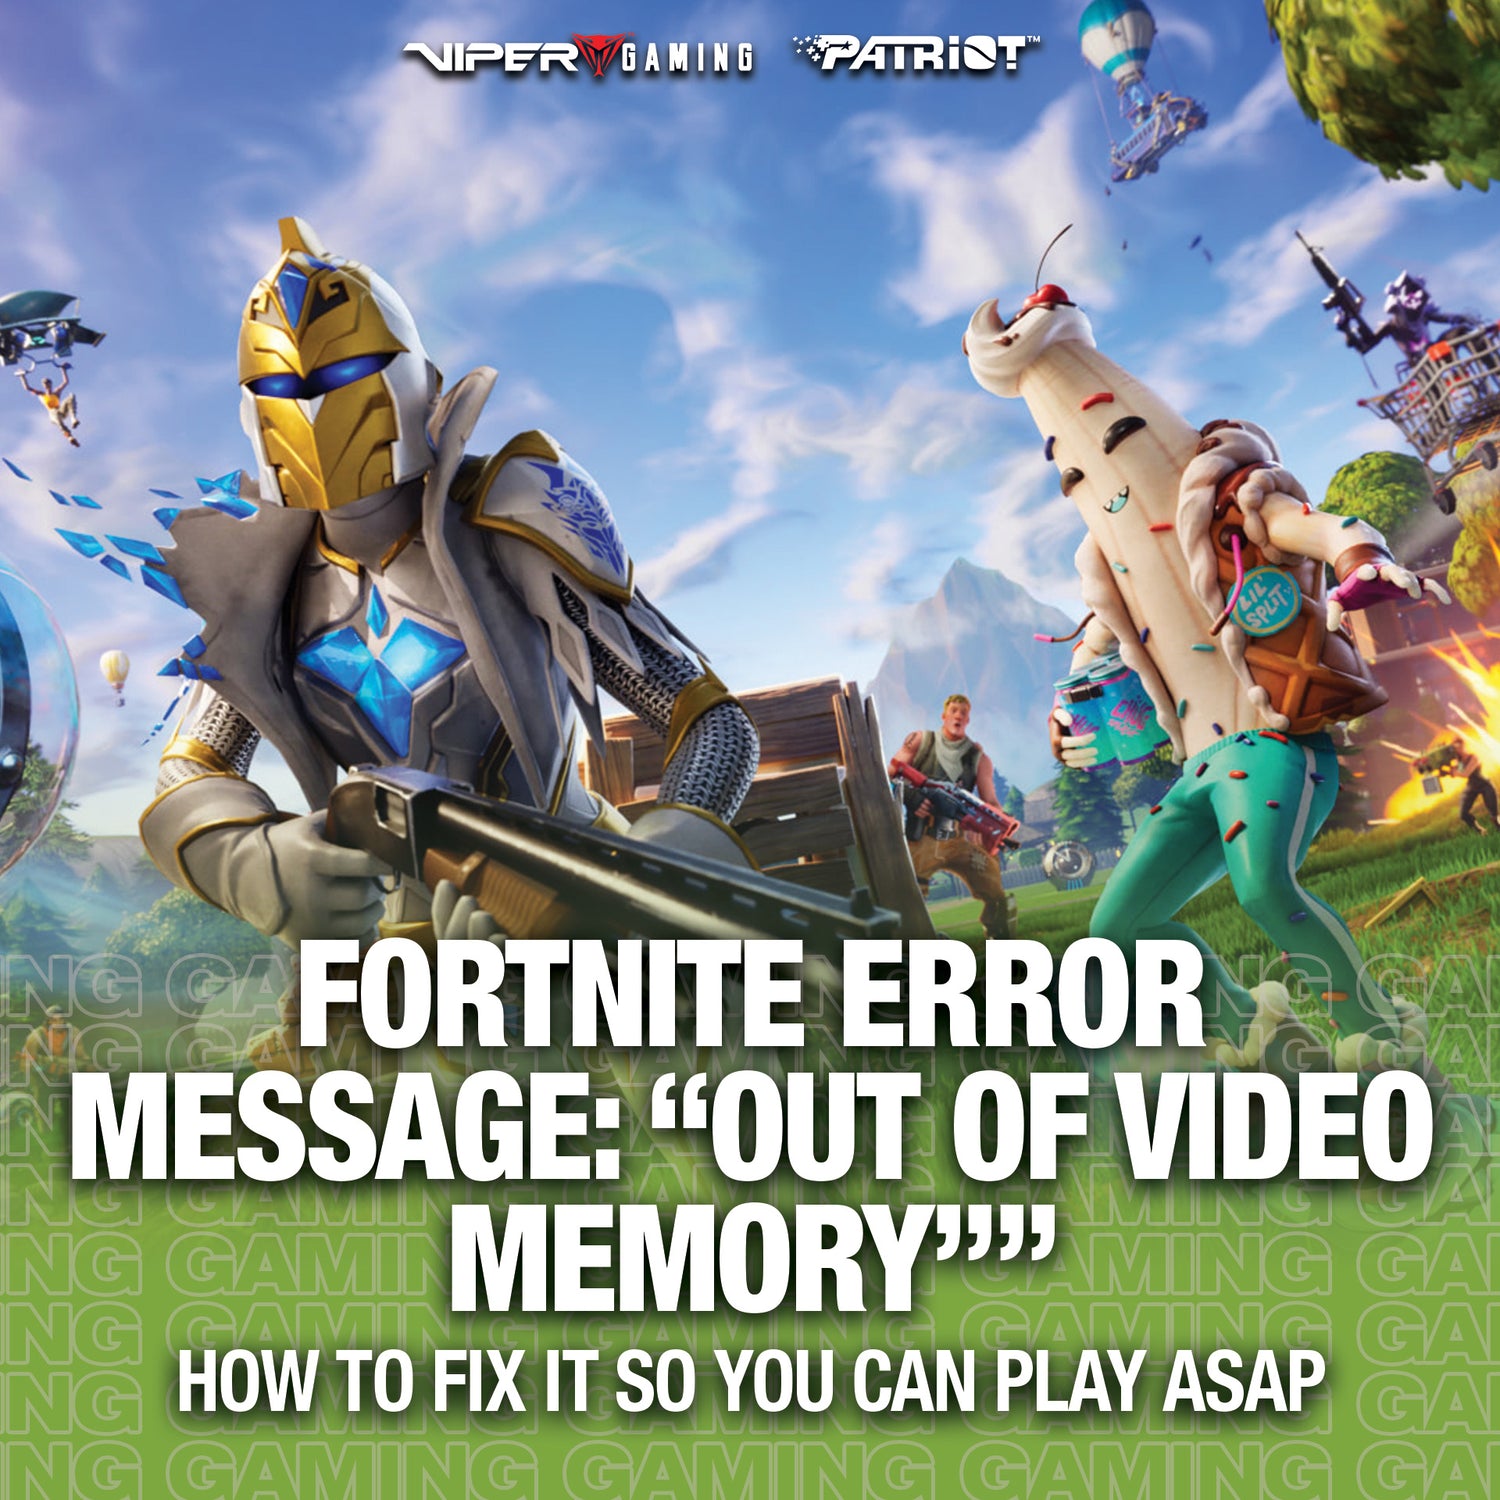 How to fix the Fortnite error message: Out of Video Memory